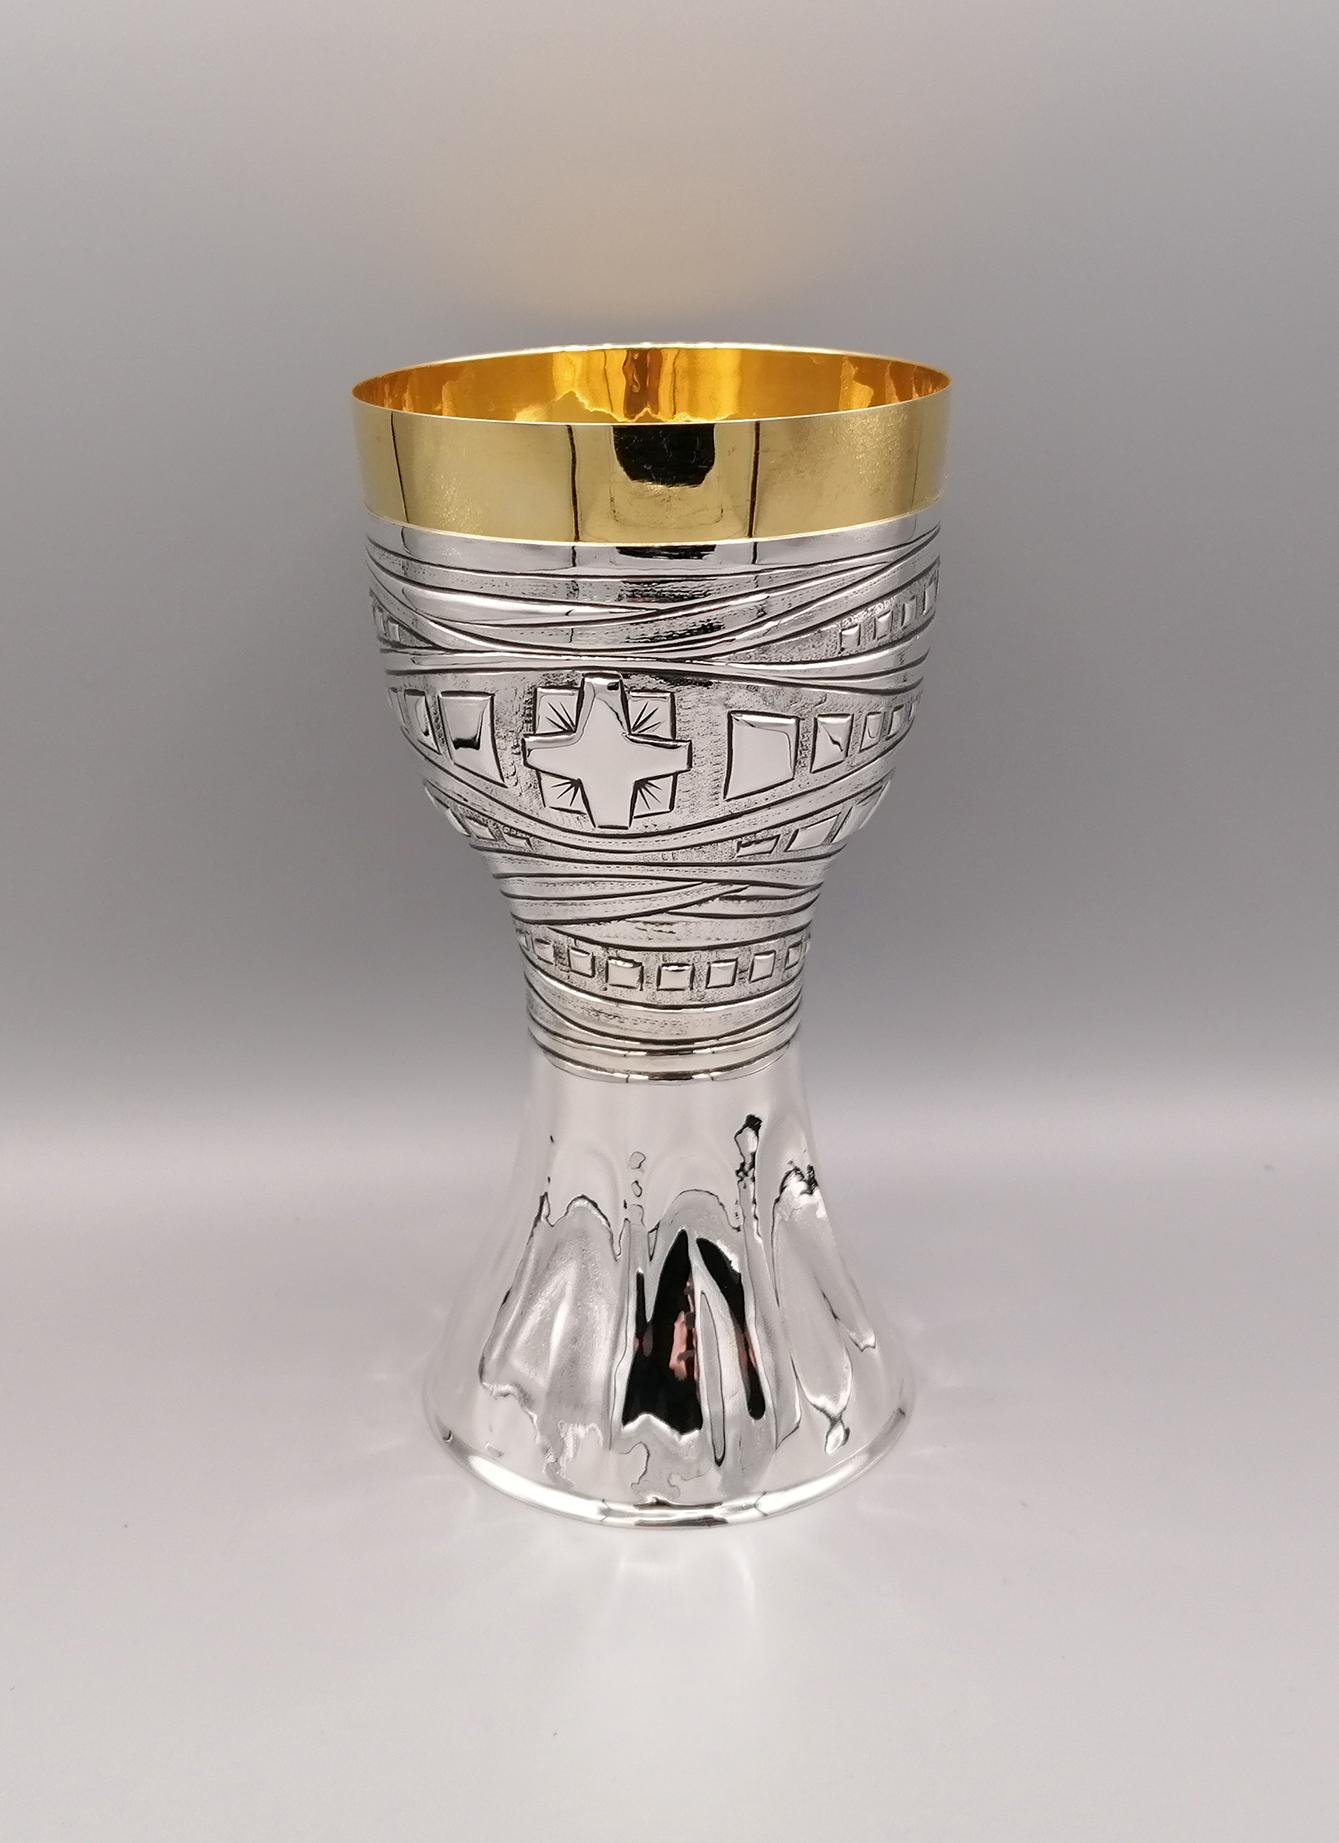 Solid sterling silver liturgical chalice, completely handmade.
The base is hammered and embossed with arched motifs that facilitate its grip. The middle part of the body is embossed and chiseled with a band design ending with equilateral